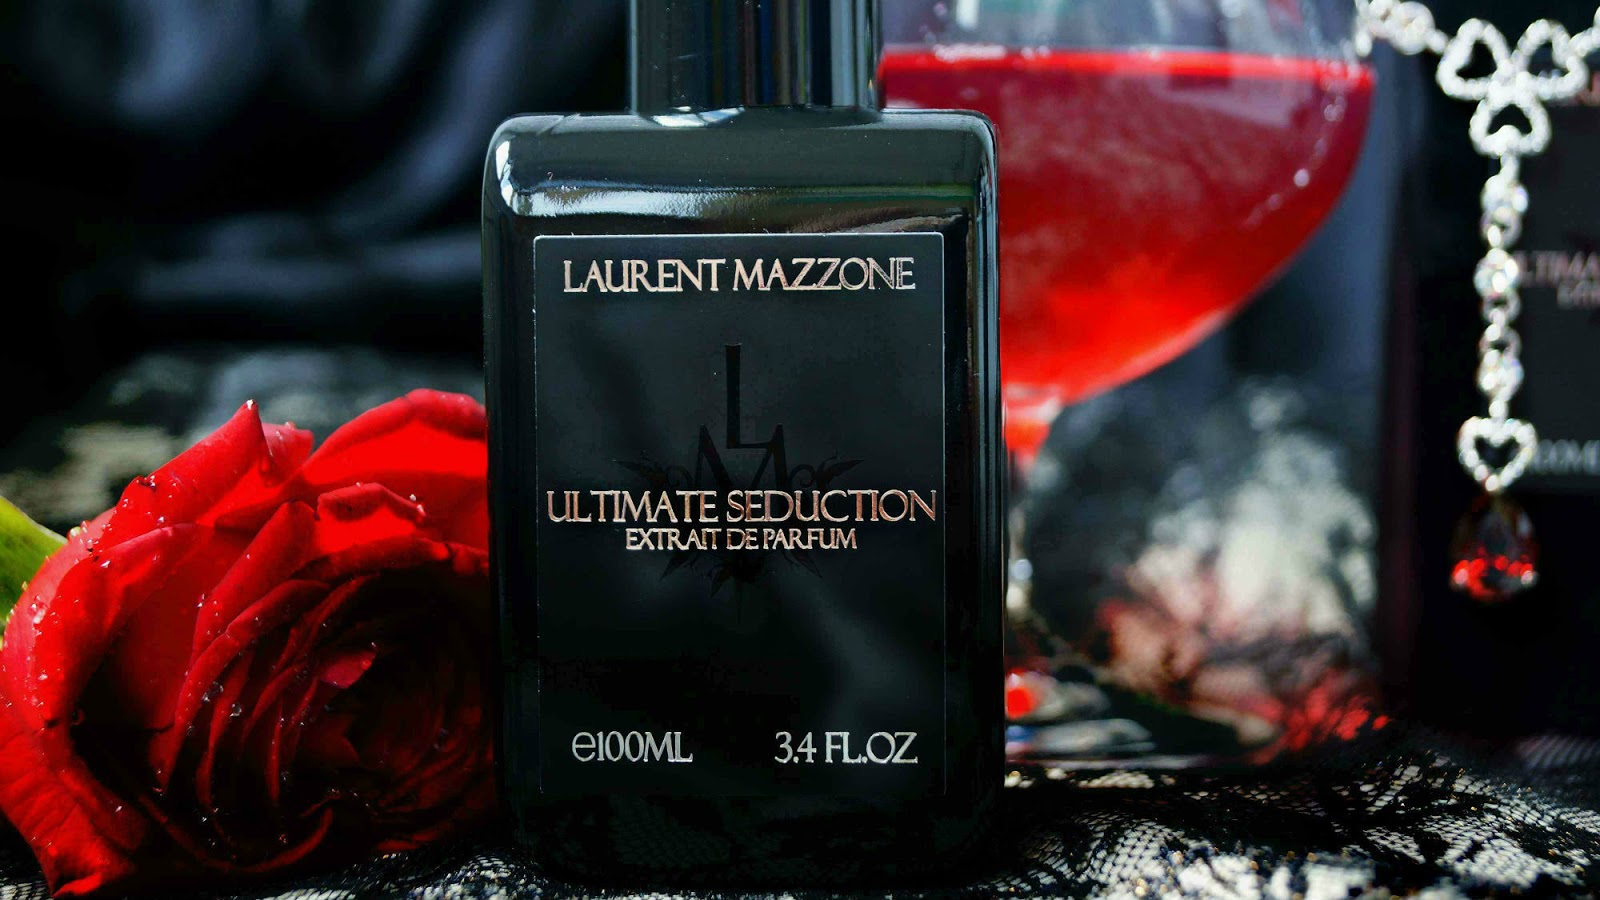 Laurent mazzone dulce pear. LM Parfums Ultimate Seduction. Laurent Mazzone Ultimate Seduction. Парфюм Laurent Mazzone. LM Parfums (Laurent Mazzone Parfums) Dulce Pear.